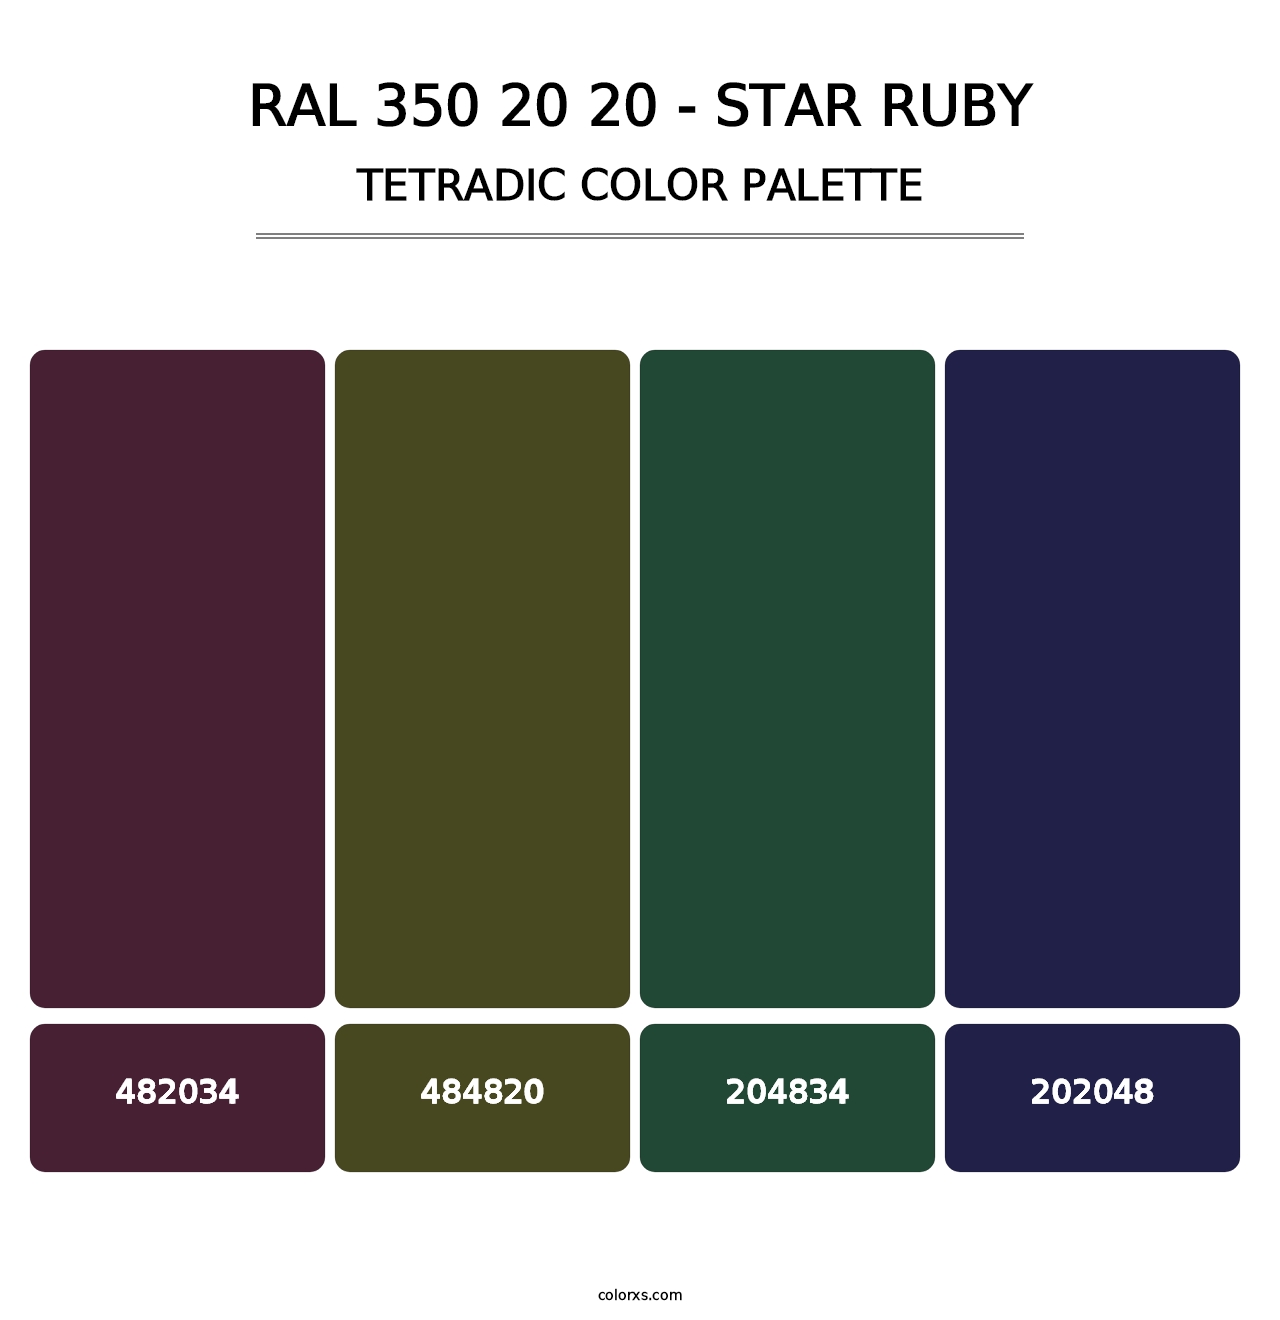 RAL 350 20 20 - Star Ruby - Tetradic Color Palette